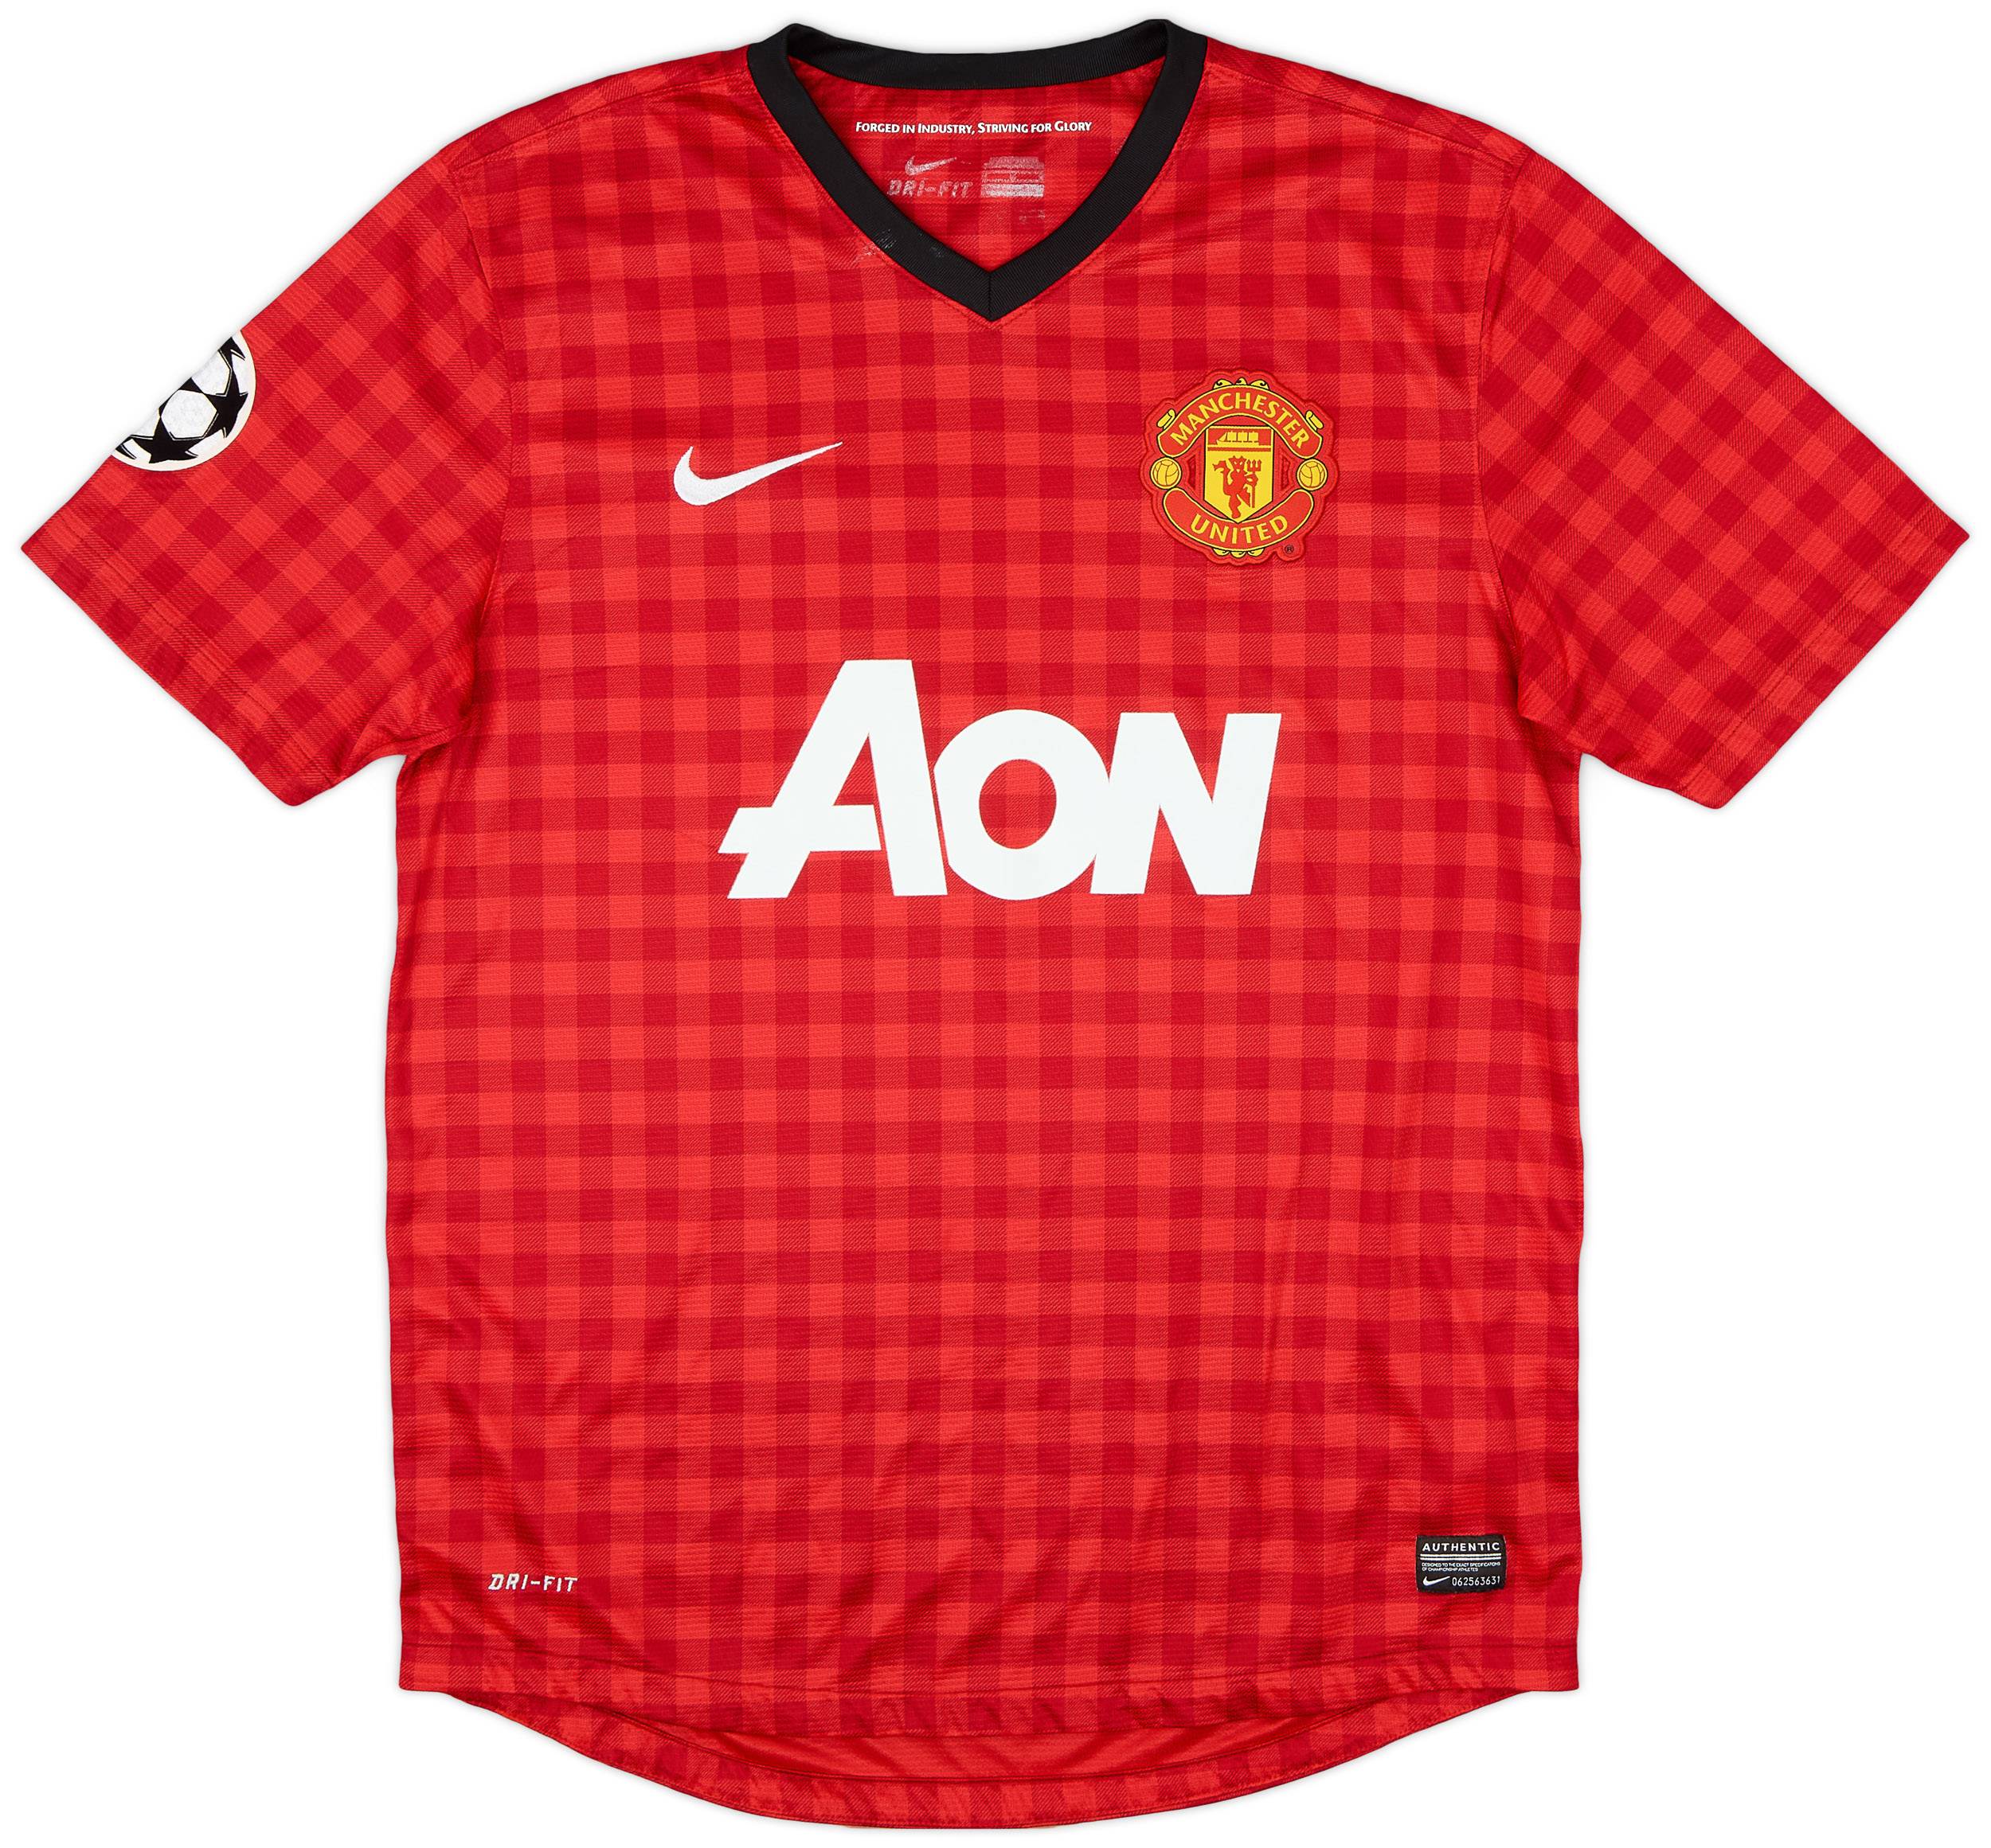 2012-13 Manchester United Home Shirt - 7/10 - (M)